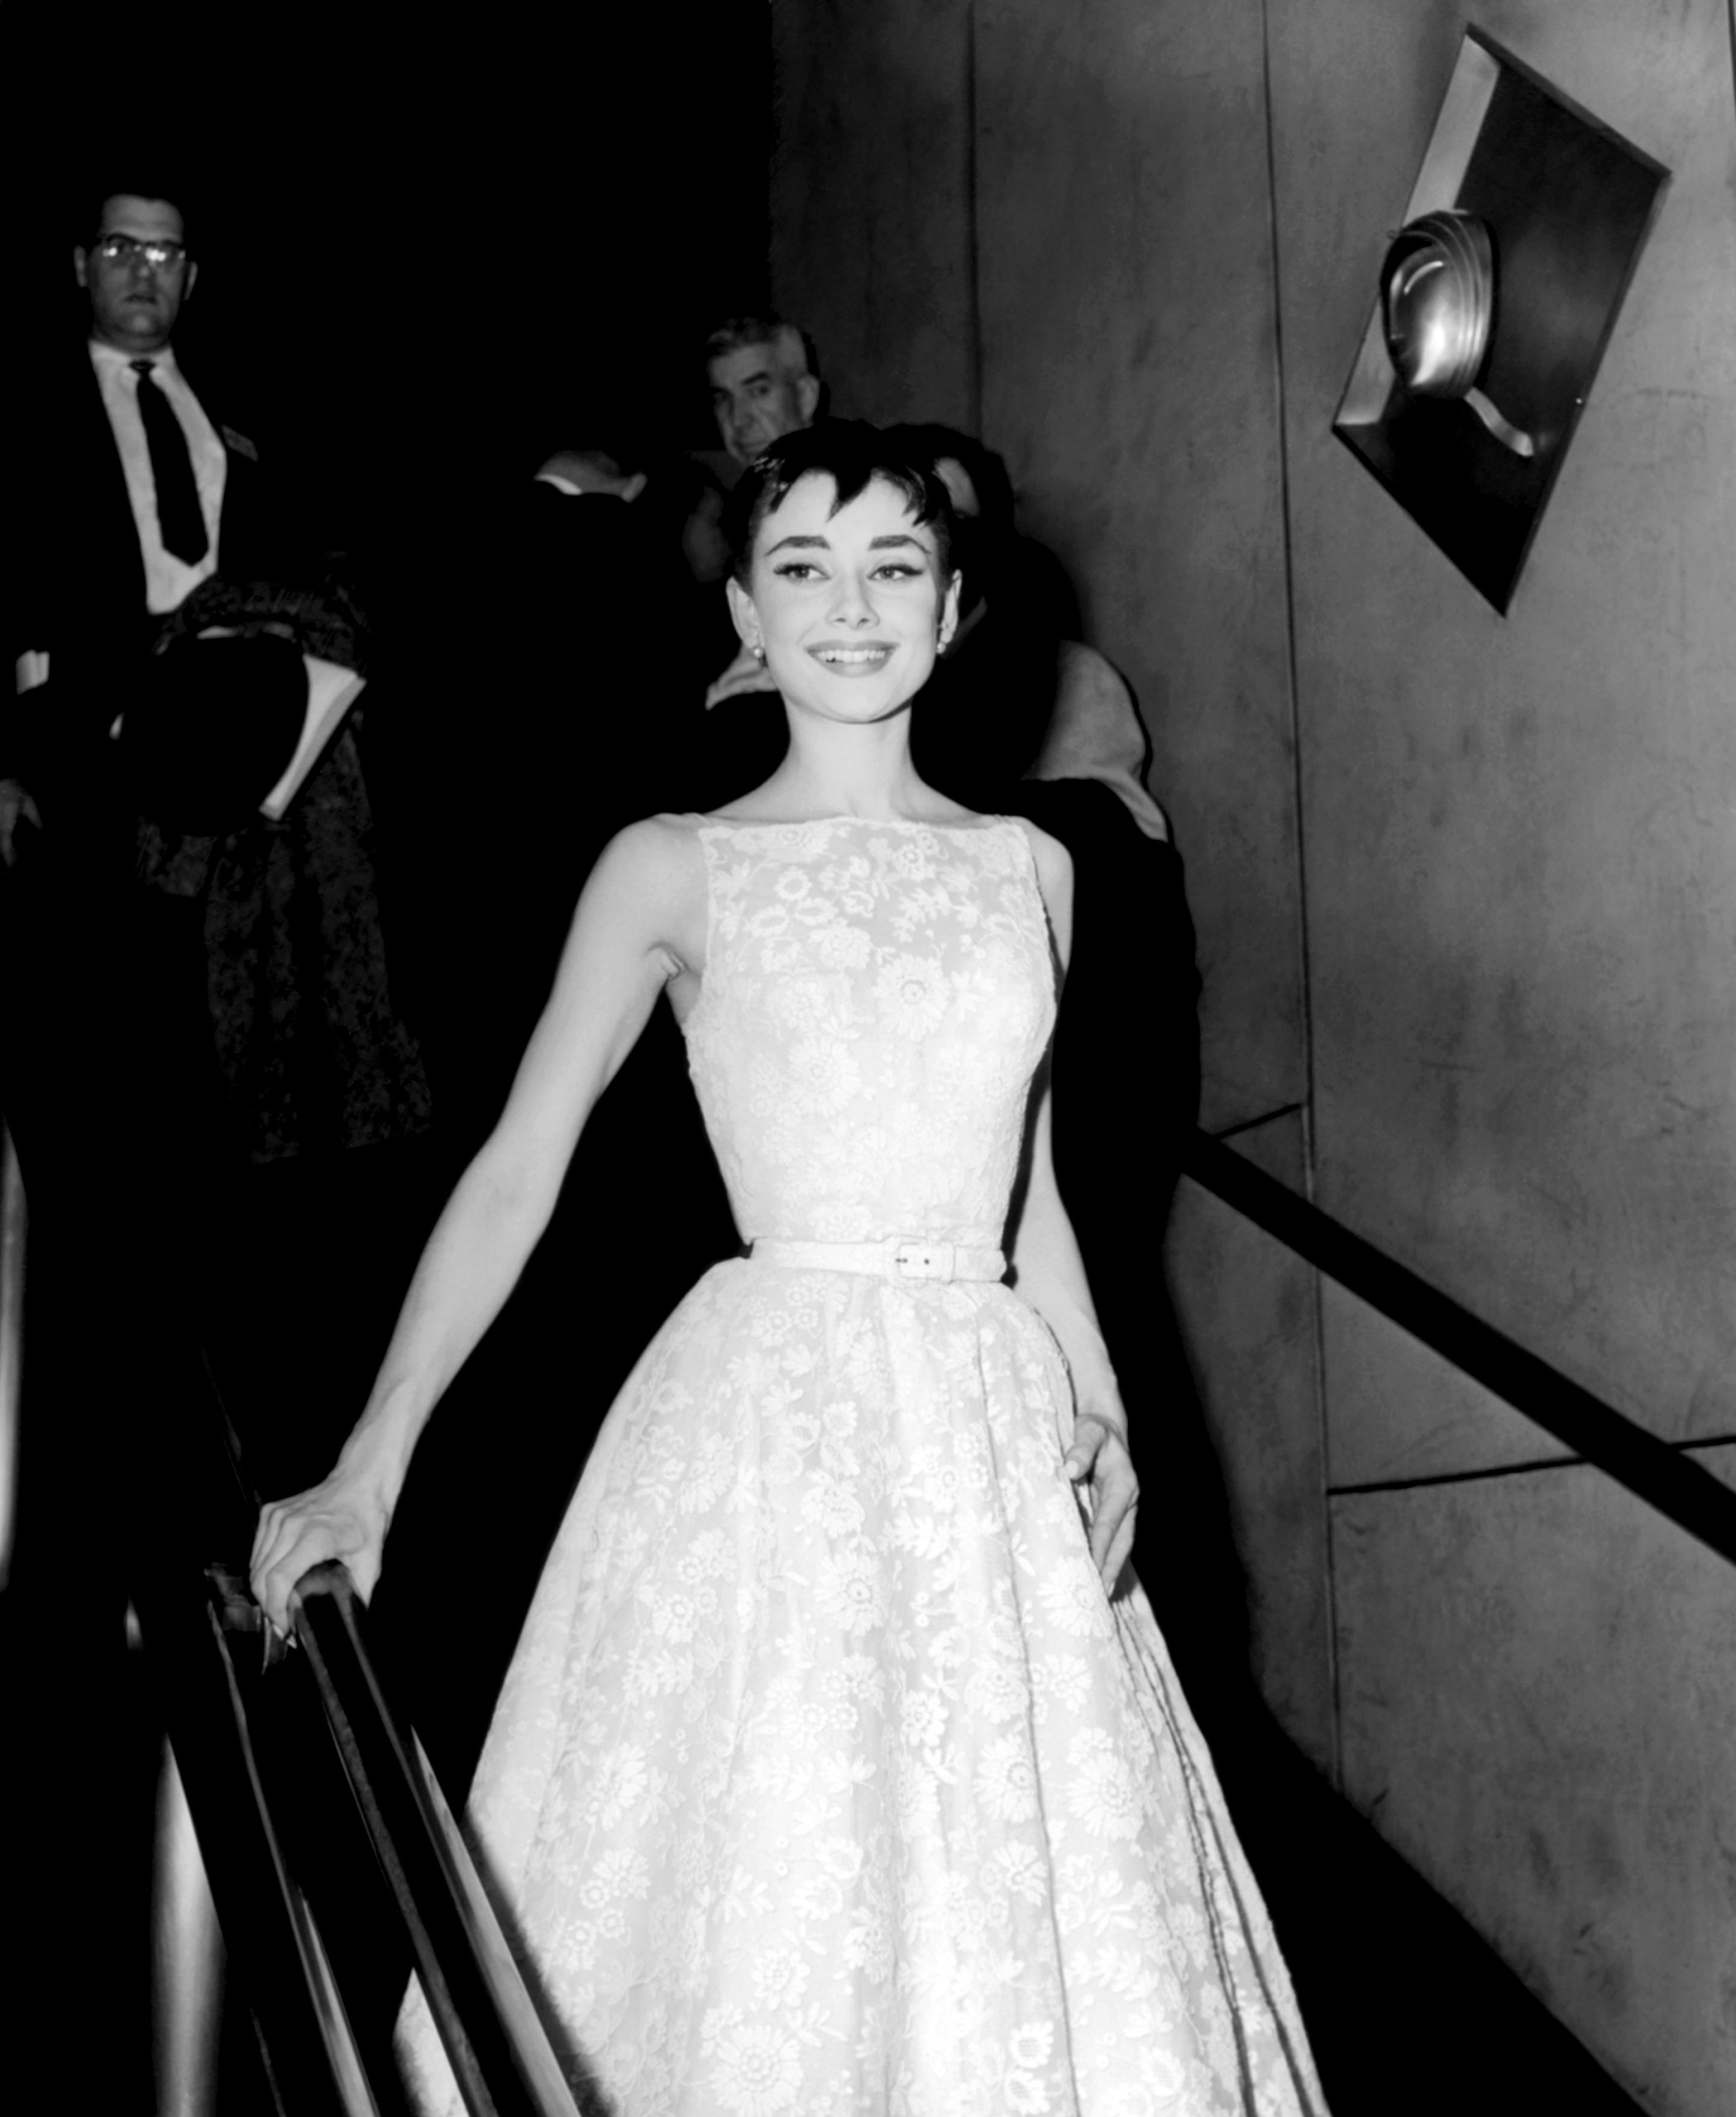 Audrey Hepburn, wearing a Givenchy gown, at the Academy Awards, 1954.